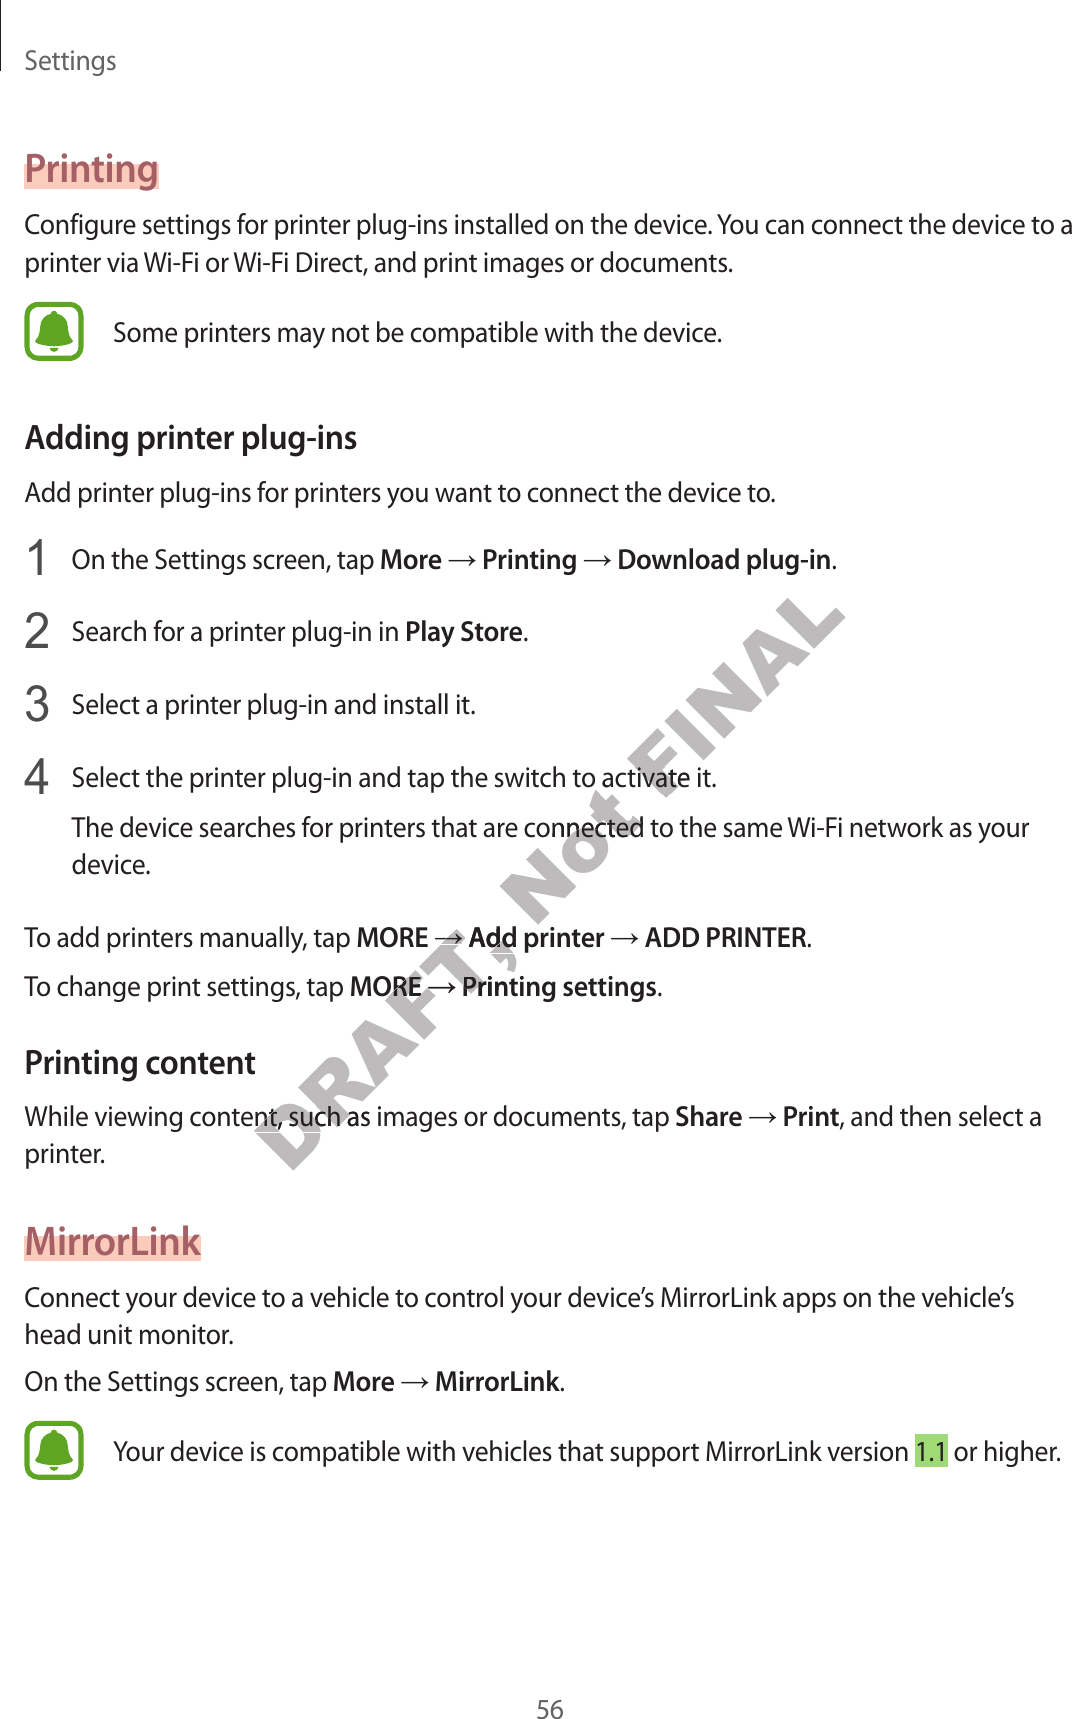 Settings56PrintingConfigure settings for printer plug-ins installed on the device. You can connect the device to a printer via Wi-Fi or Wi-Fi Direct, and print images or documents.Some printers may not be compatible with the device.Adding printer plug-insAdd printer plug-ins for printers you want to connect the device to. On the Settings screen, tap More  Printing  Download plug-in. Search for a printer plug-in in Play Store. Select a printer plug-in and install it. Select the printer plug-in and tap the switch to activate it.The device searches for printers that are connected to the same Wi-Fi network as your device.To add printers manually, tap MORE  Add printer  ADD PRINTER.To change print settings, tap MORE  Printing settings.Printing contentWhile viewing content, such as images or documents, tap Share  Print, and then select a printer.MirrorLinkConnect your device to a vehicle to control your device’s MirrorLink apps on the vehicle’s head unit monitor.On the Settings screen, tap More  MirrorLink.Your device is compatible with vehicles that support MirrorLink version 1.1 or higher.DRAFT, Add prinAdd prinMOREMOREPrinting settingsPrintent, such as images or documentent, such as images or documenNot ch to acch to ace connected tonnected tFINALo activate ito activate it